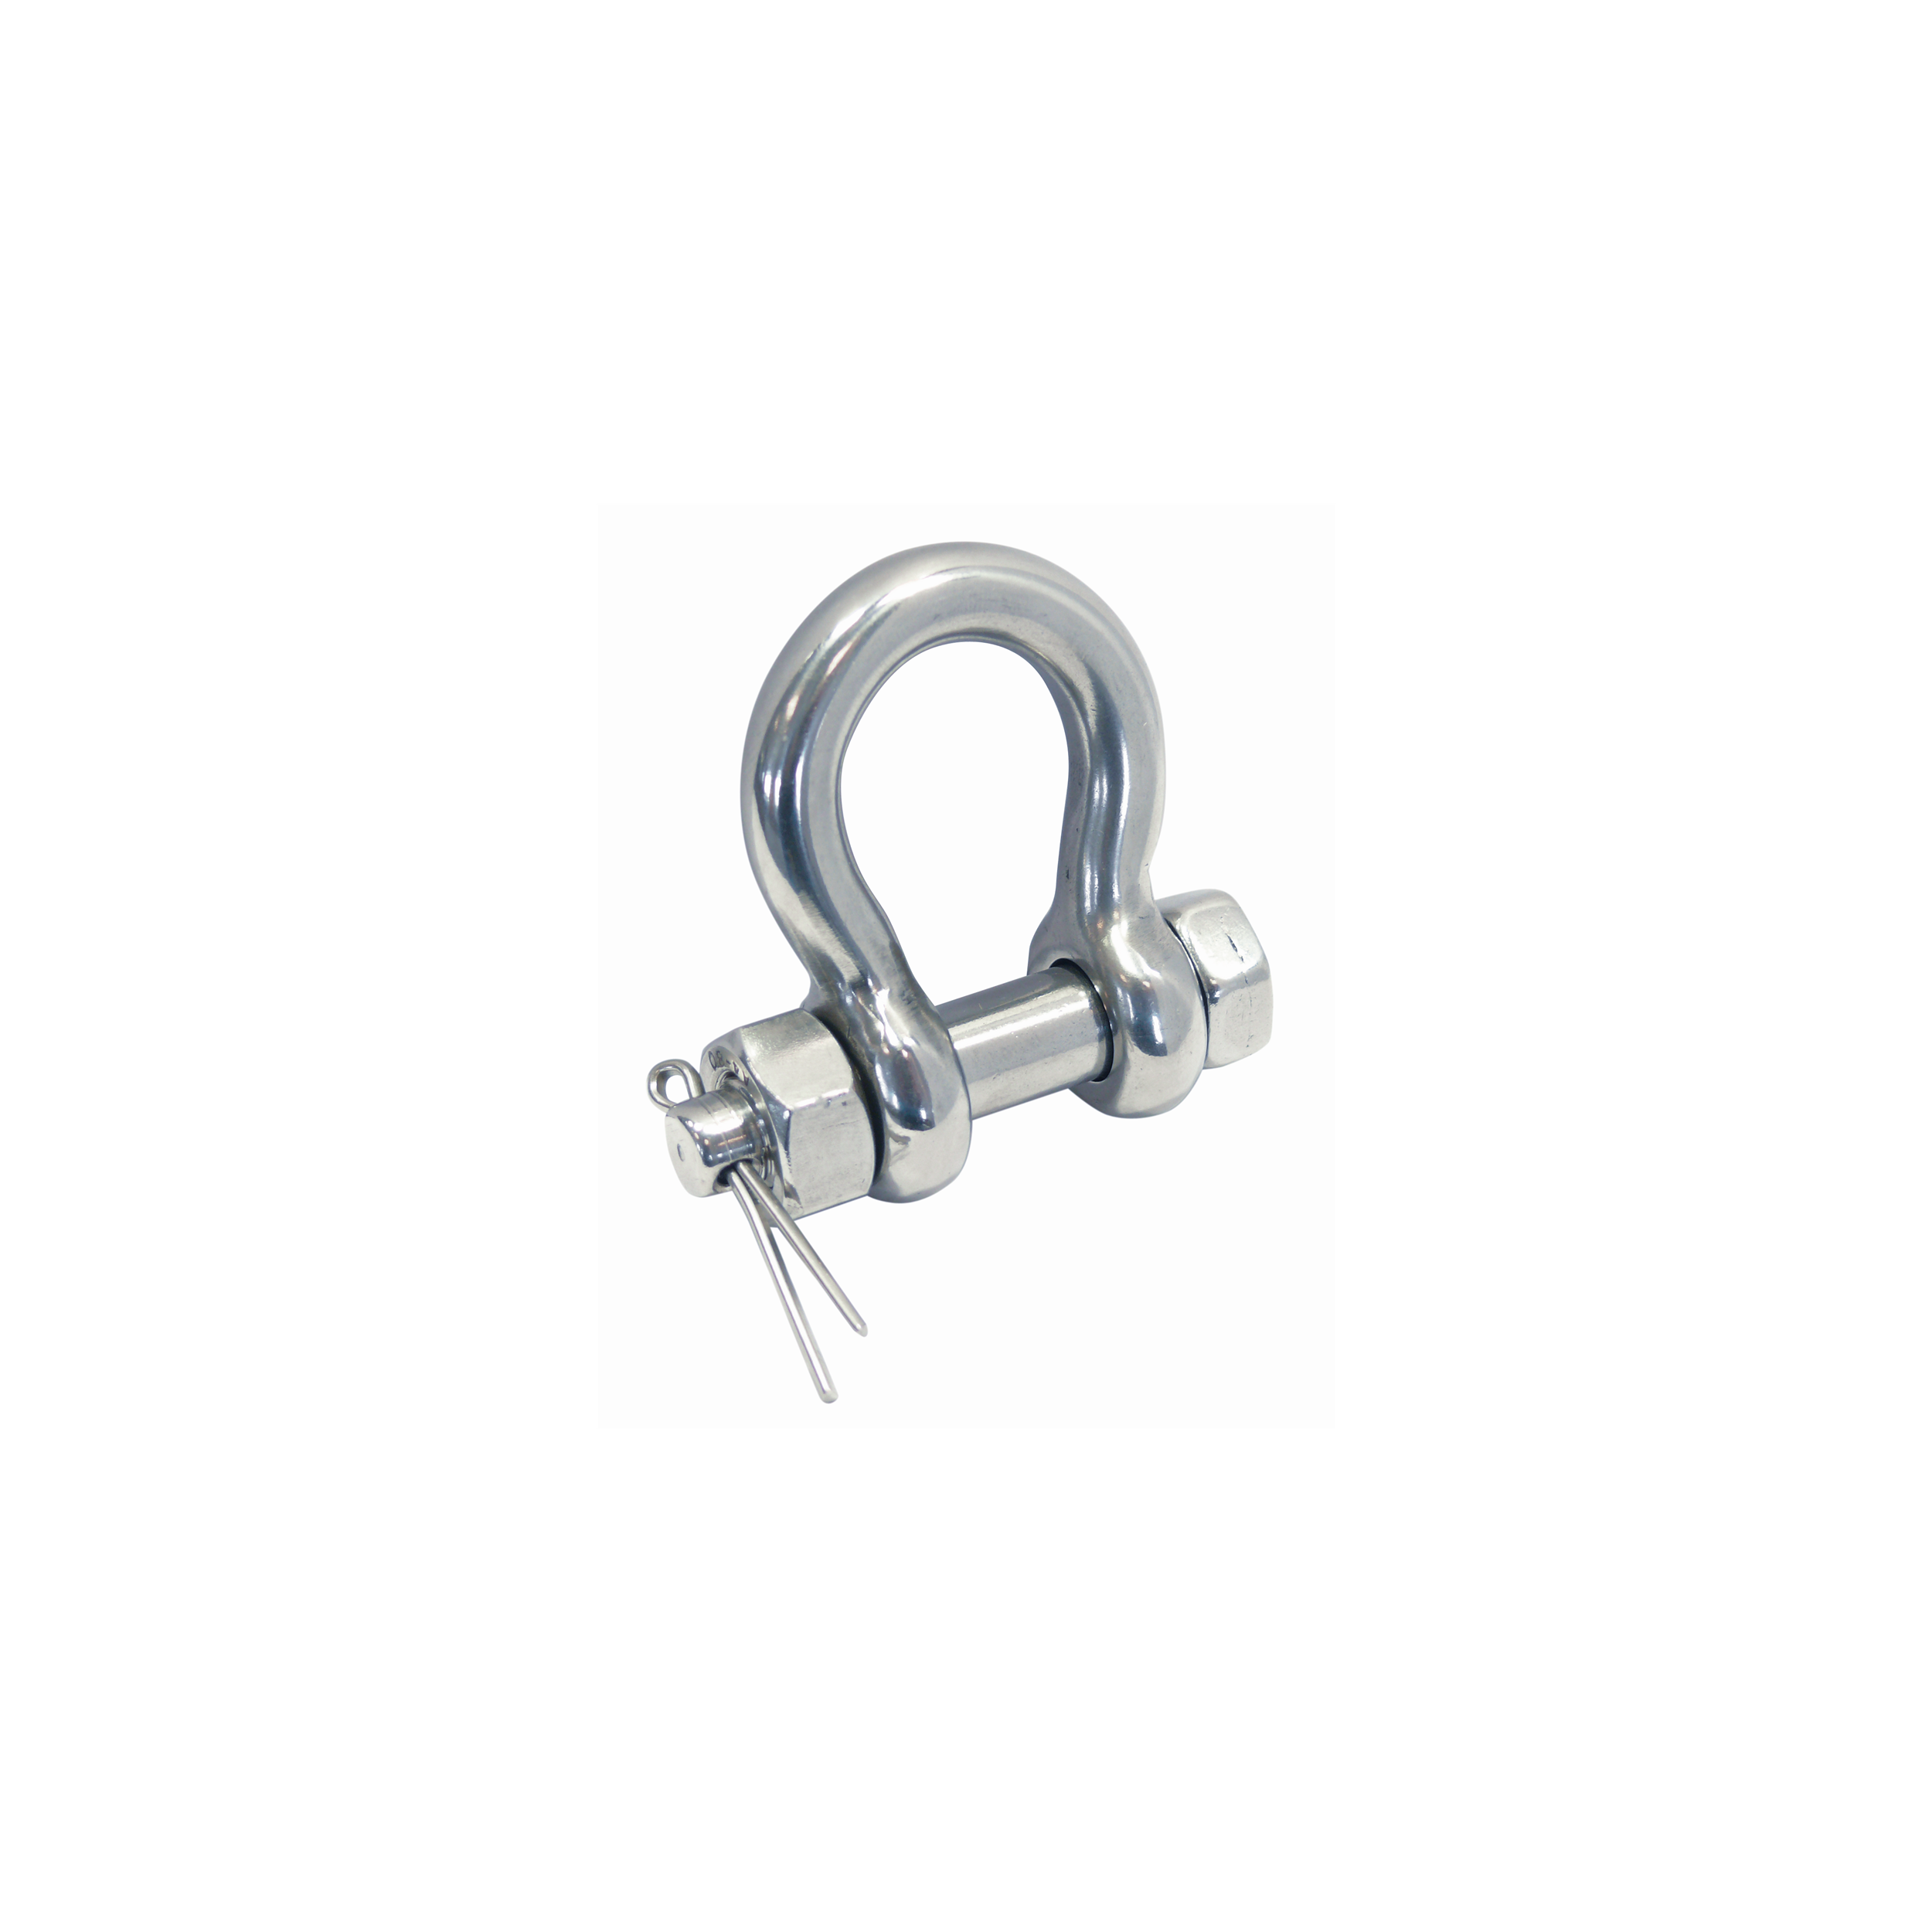 Bow shackle with secure bolt A4  bolt 25mm, bow 22mm